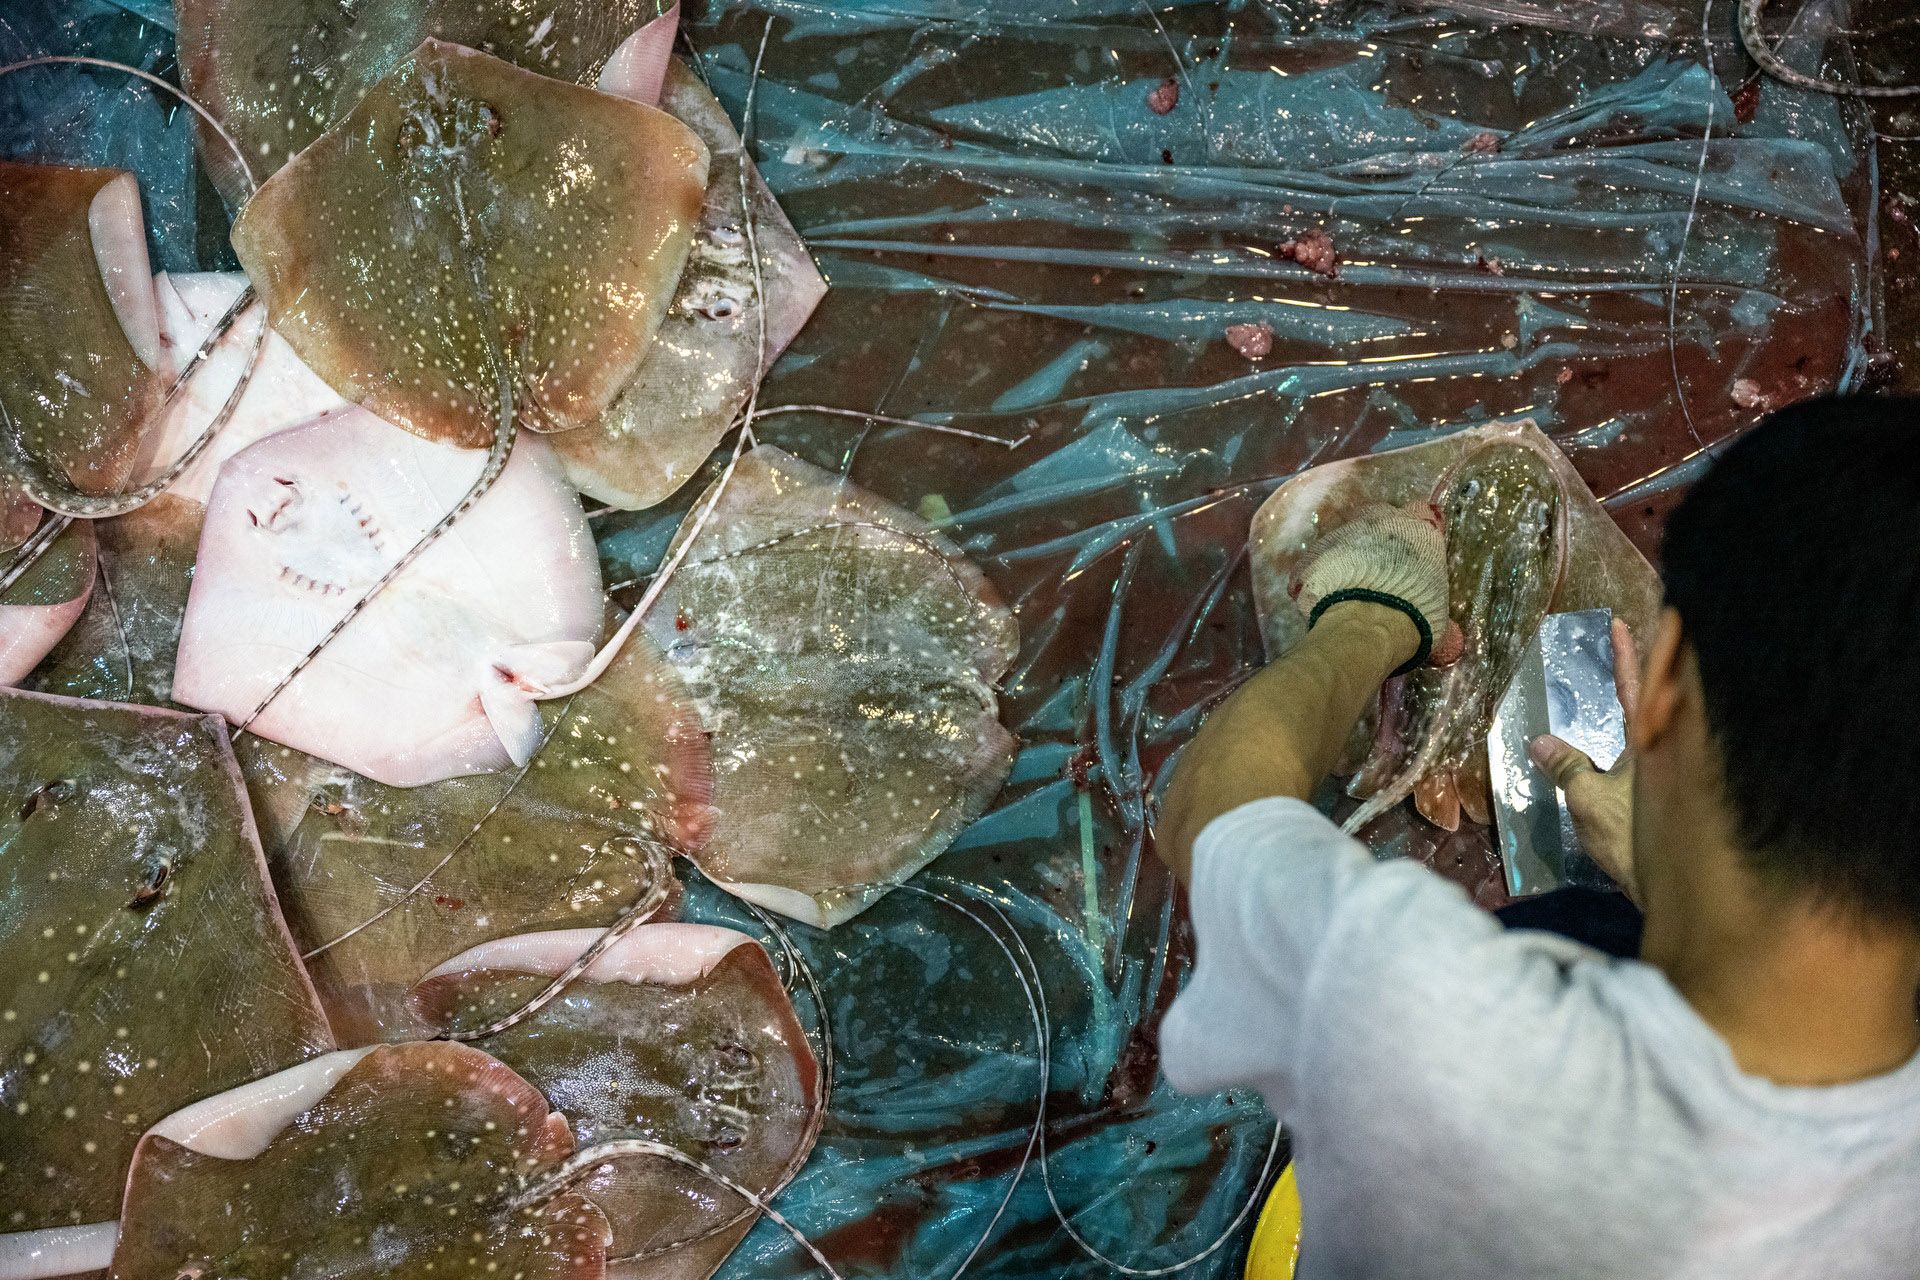 A worker preparing stingrays for sale by slicing them into smaller pieces.